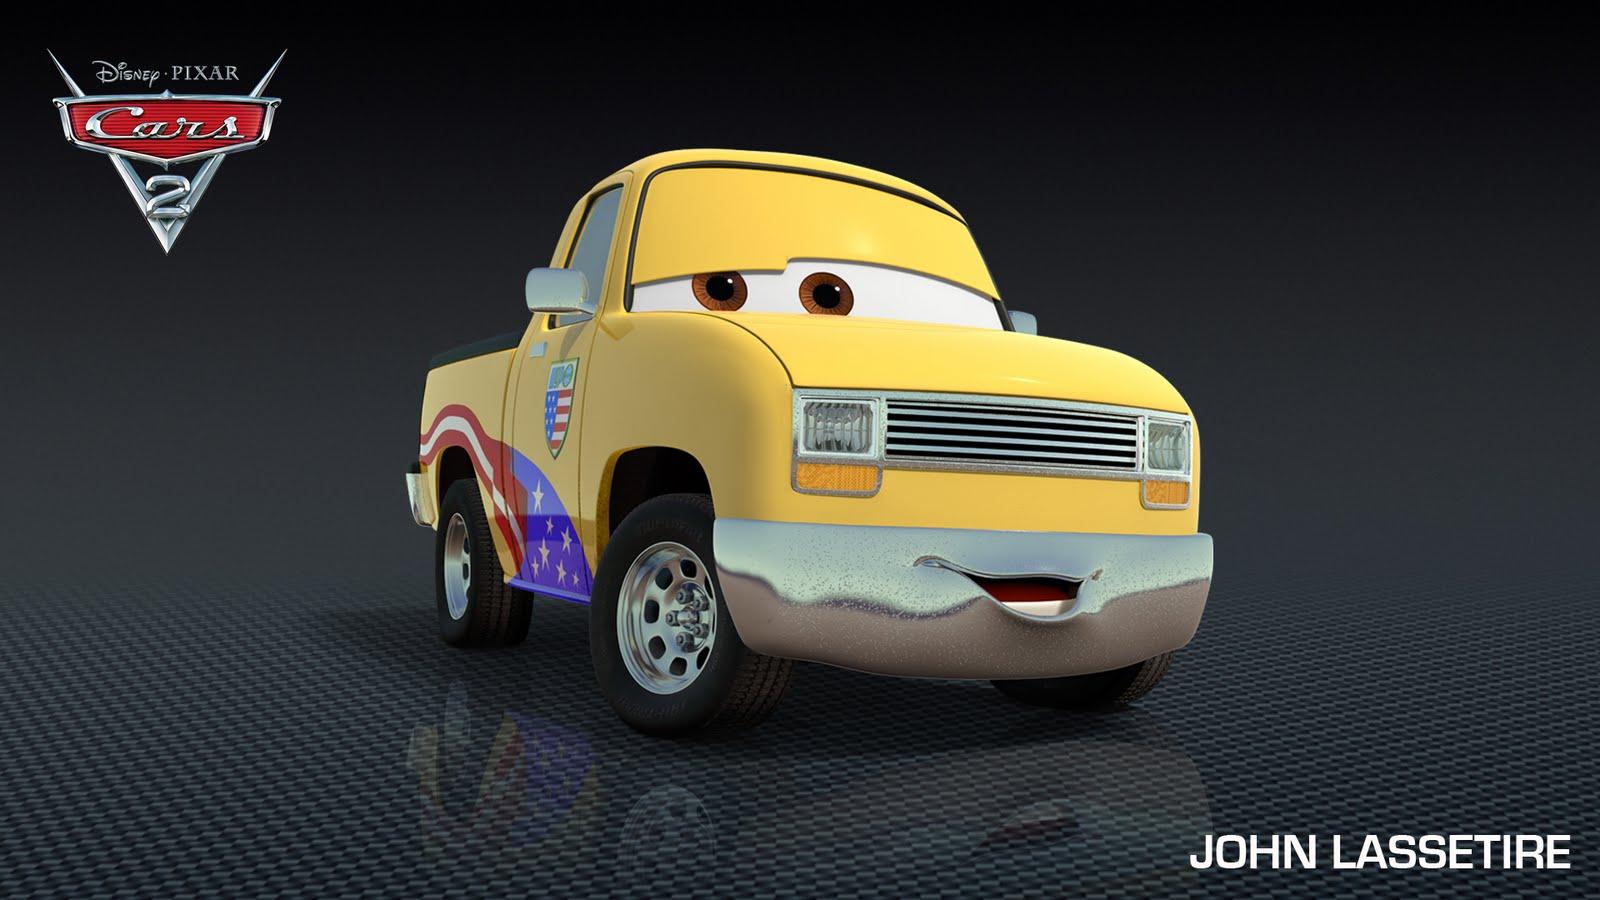 John Lasseter Is A Character In 'Cars 2'